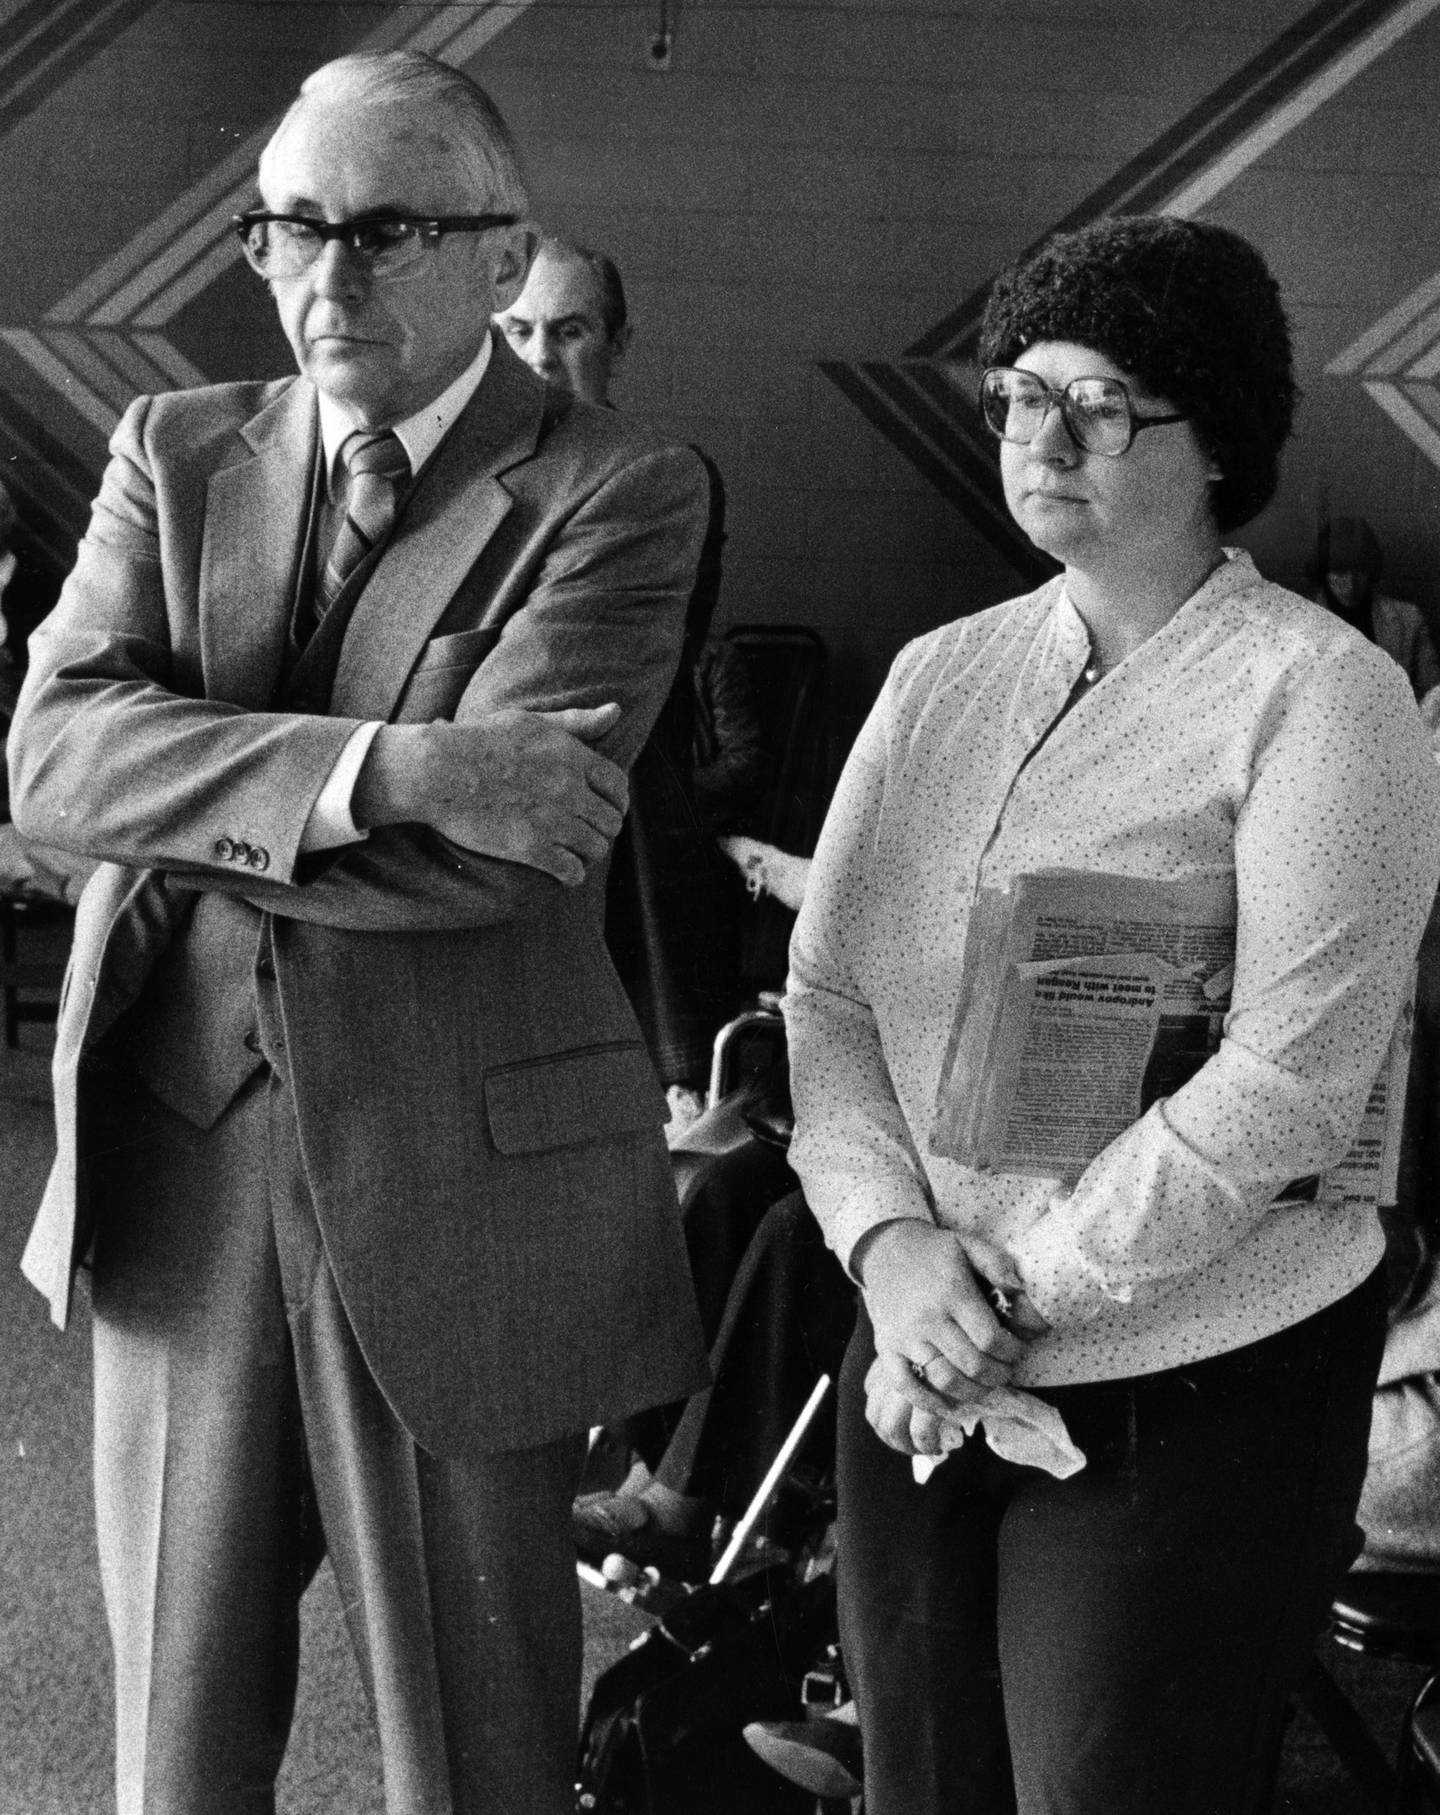  LeAnn Lewis waits with her father, Charles Miller, at Midway Airport for a Dec. 31, 1982, flight to Kansas City on their way to Miller’s home in Kearney, Missouri. 